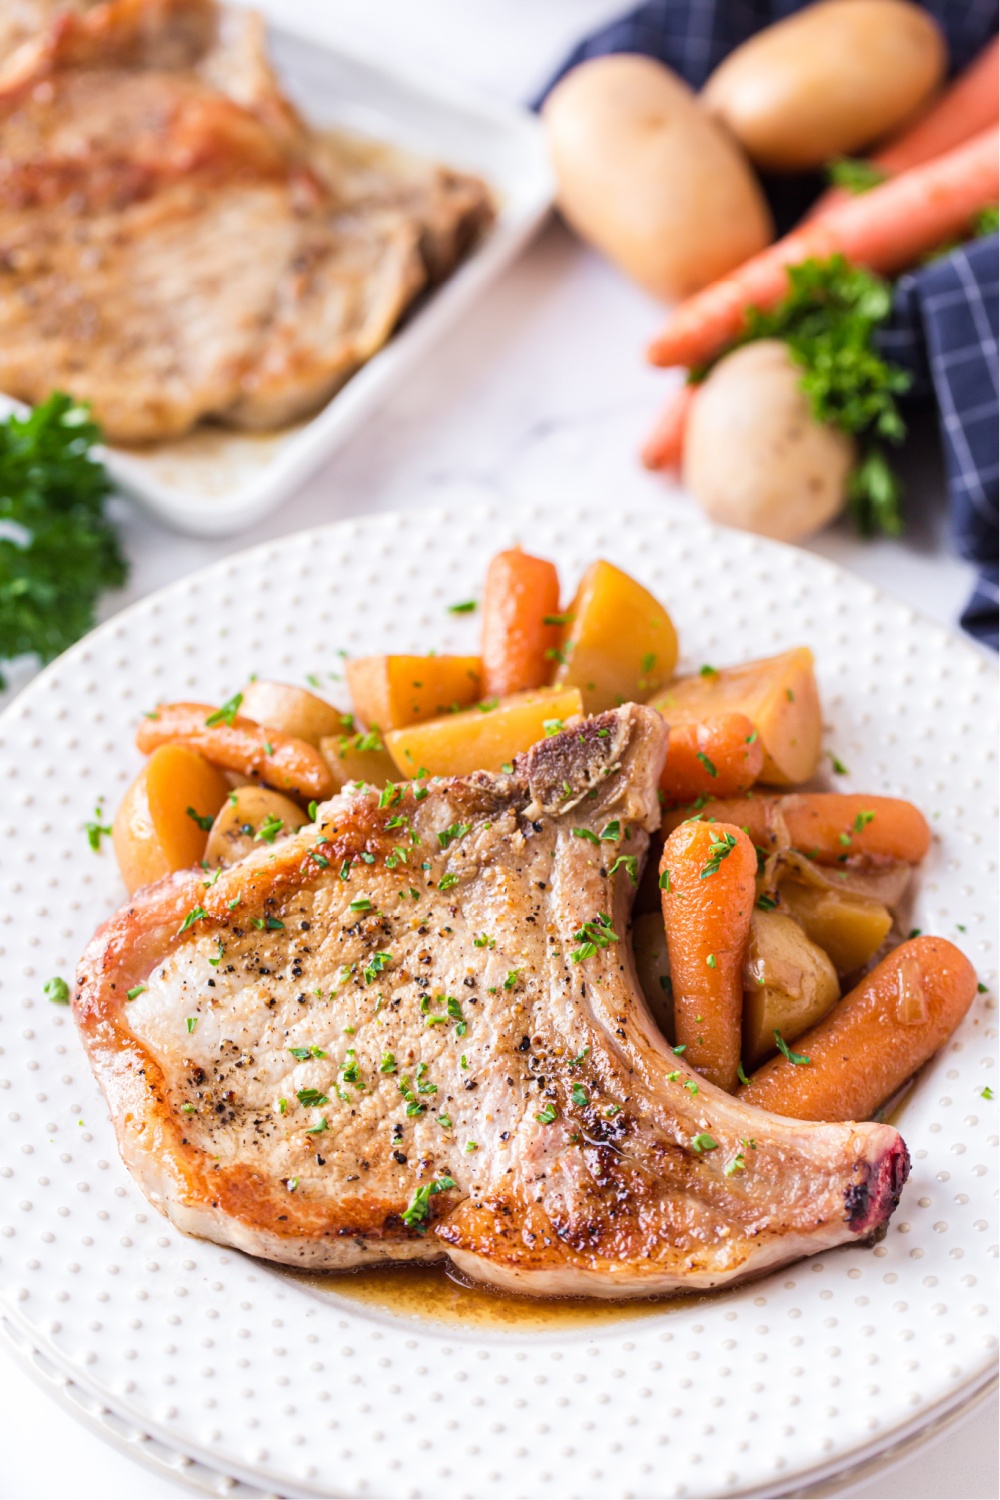 Instant pot pork chops with potatoes and carrots, served on a white plate